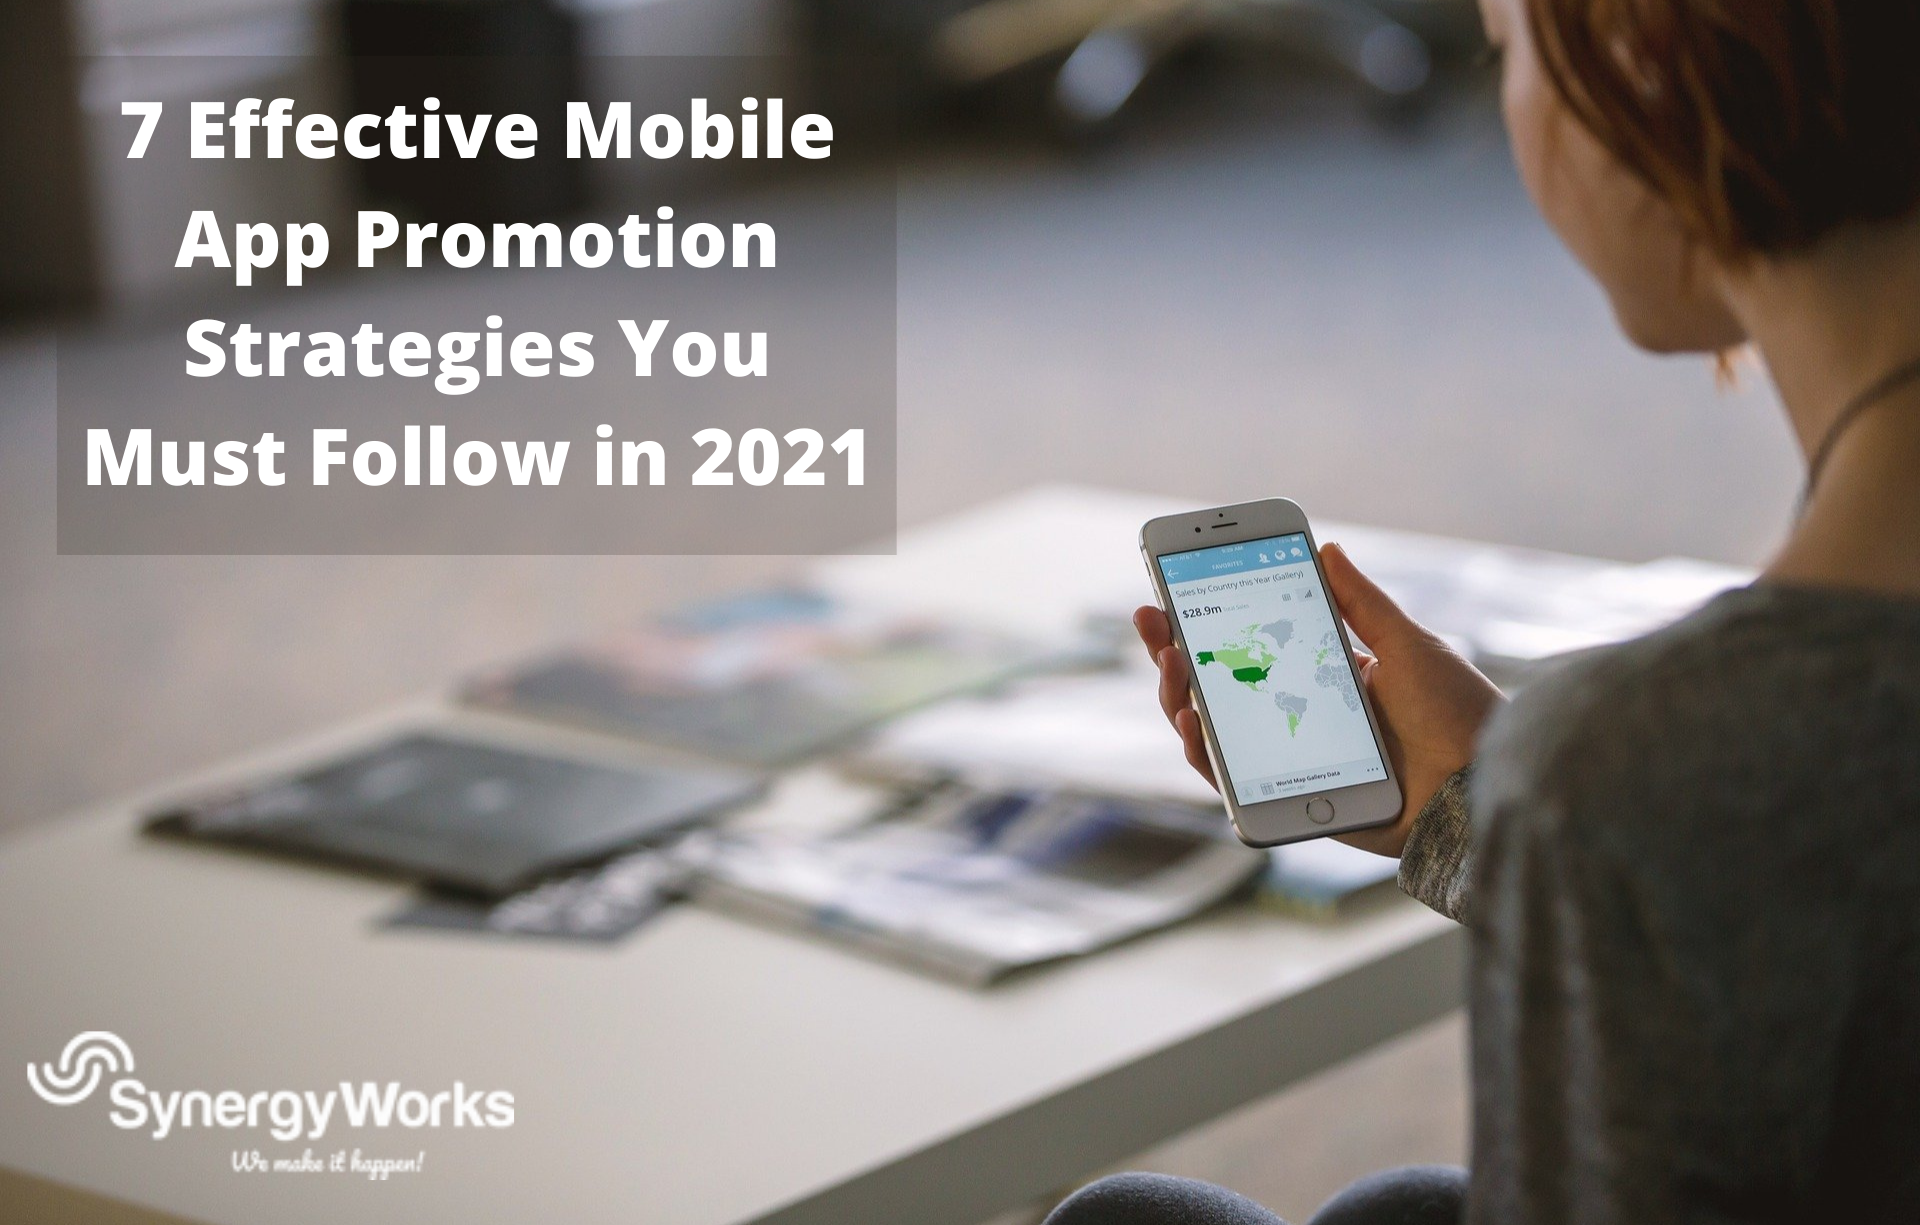 7 Effective Mobile App Promotion Strategies You Must Follow in 2021